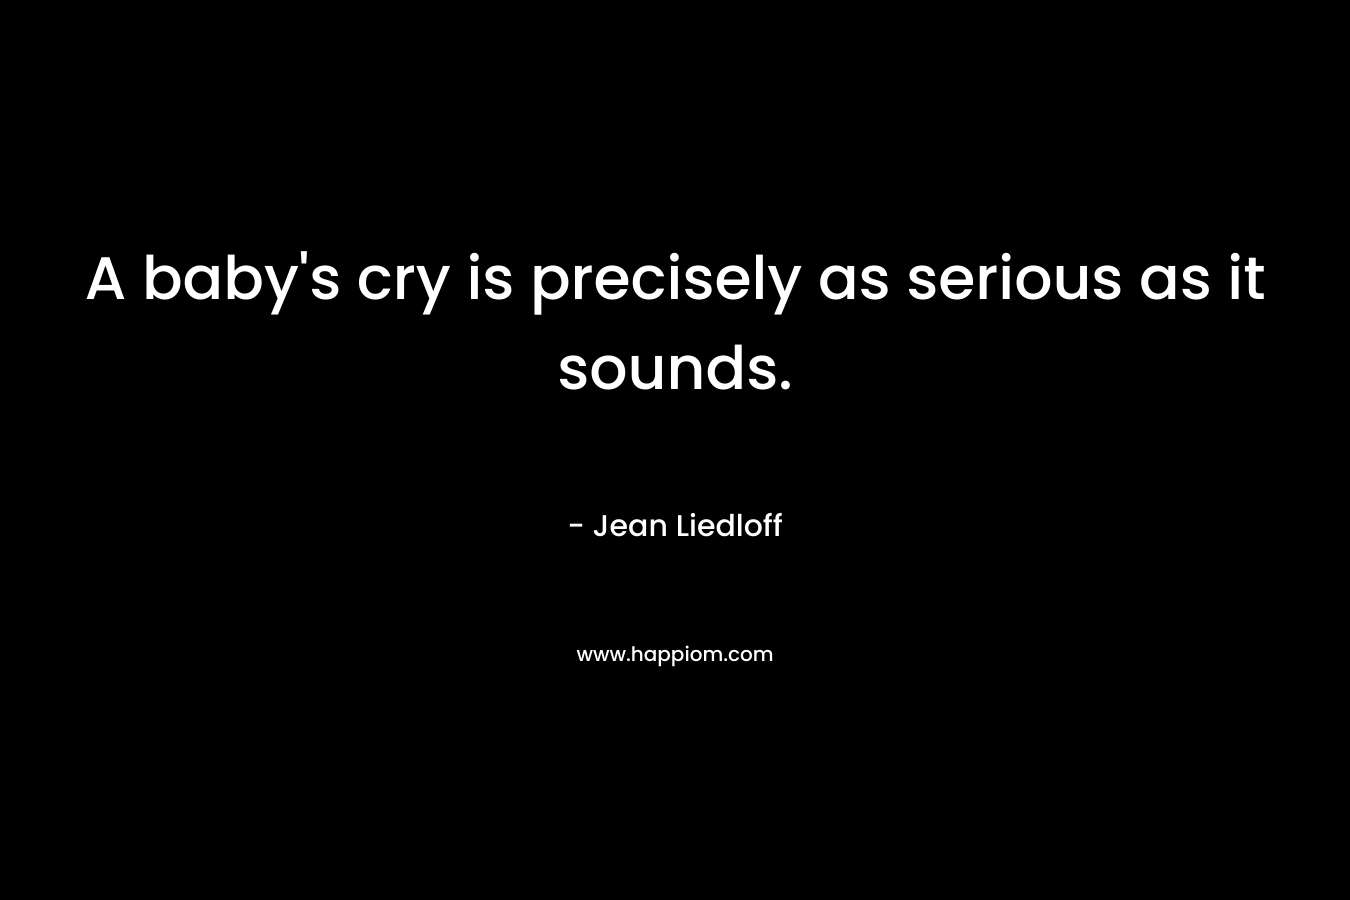 A baby's cry is precisely as serious as it sounds.